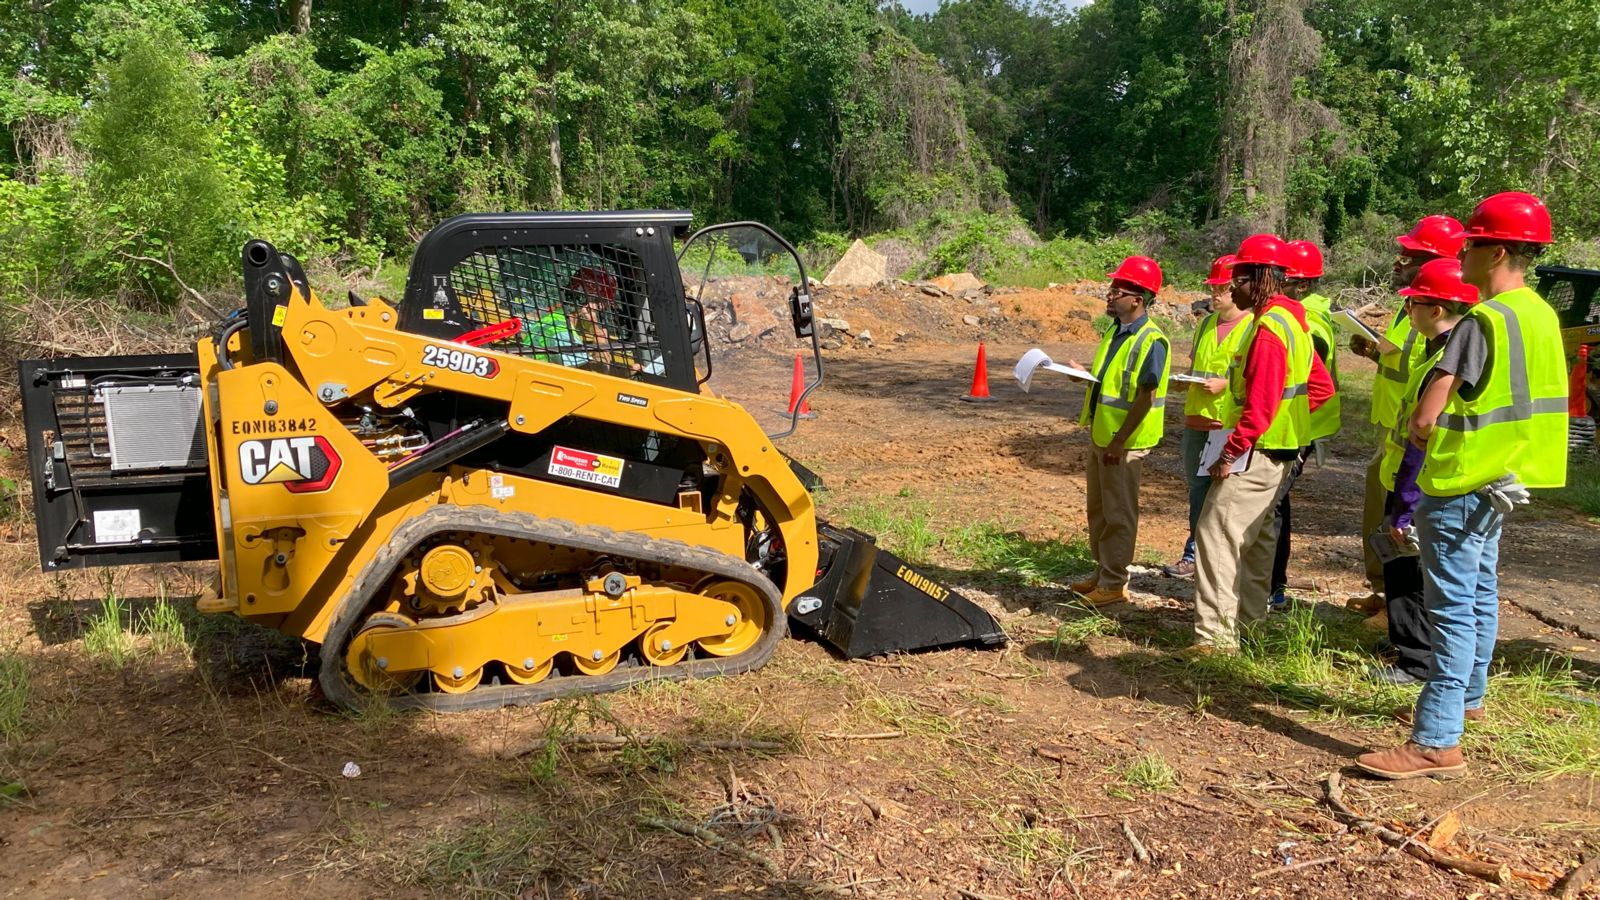 Students in the skid steer training at Gadsden State Community College observe the operation of the piece of equipment used primarily for digging. The free training program is through Alabama Community College System’s Skills for Success.